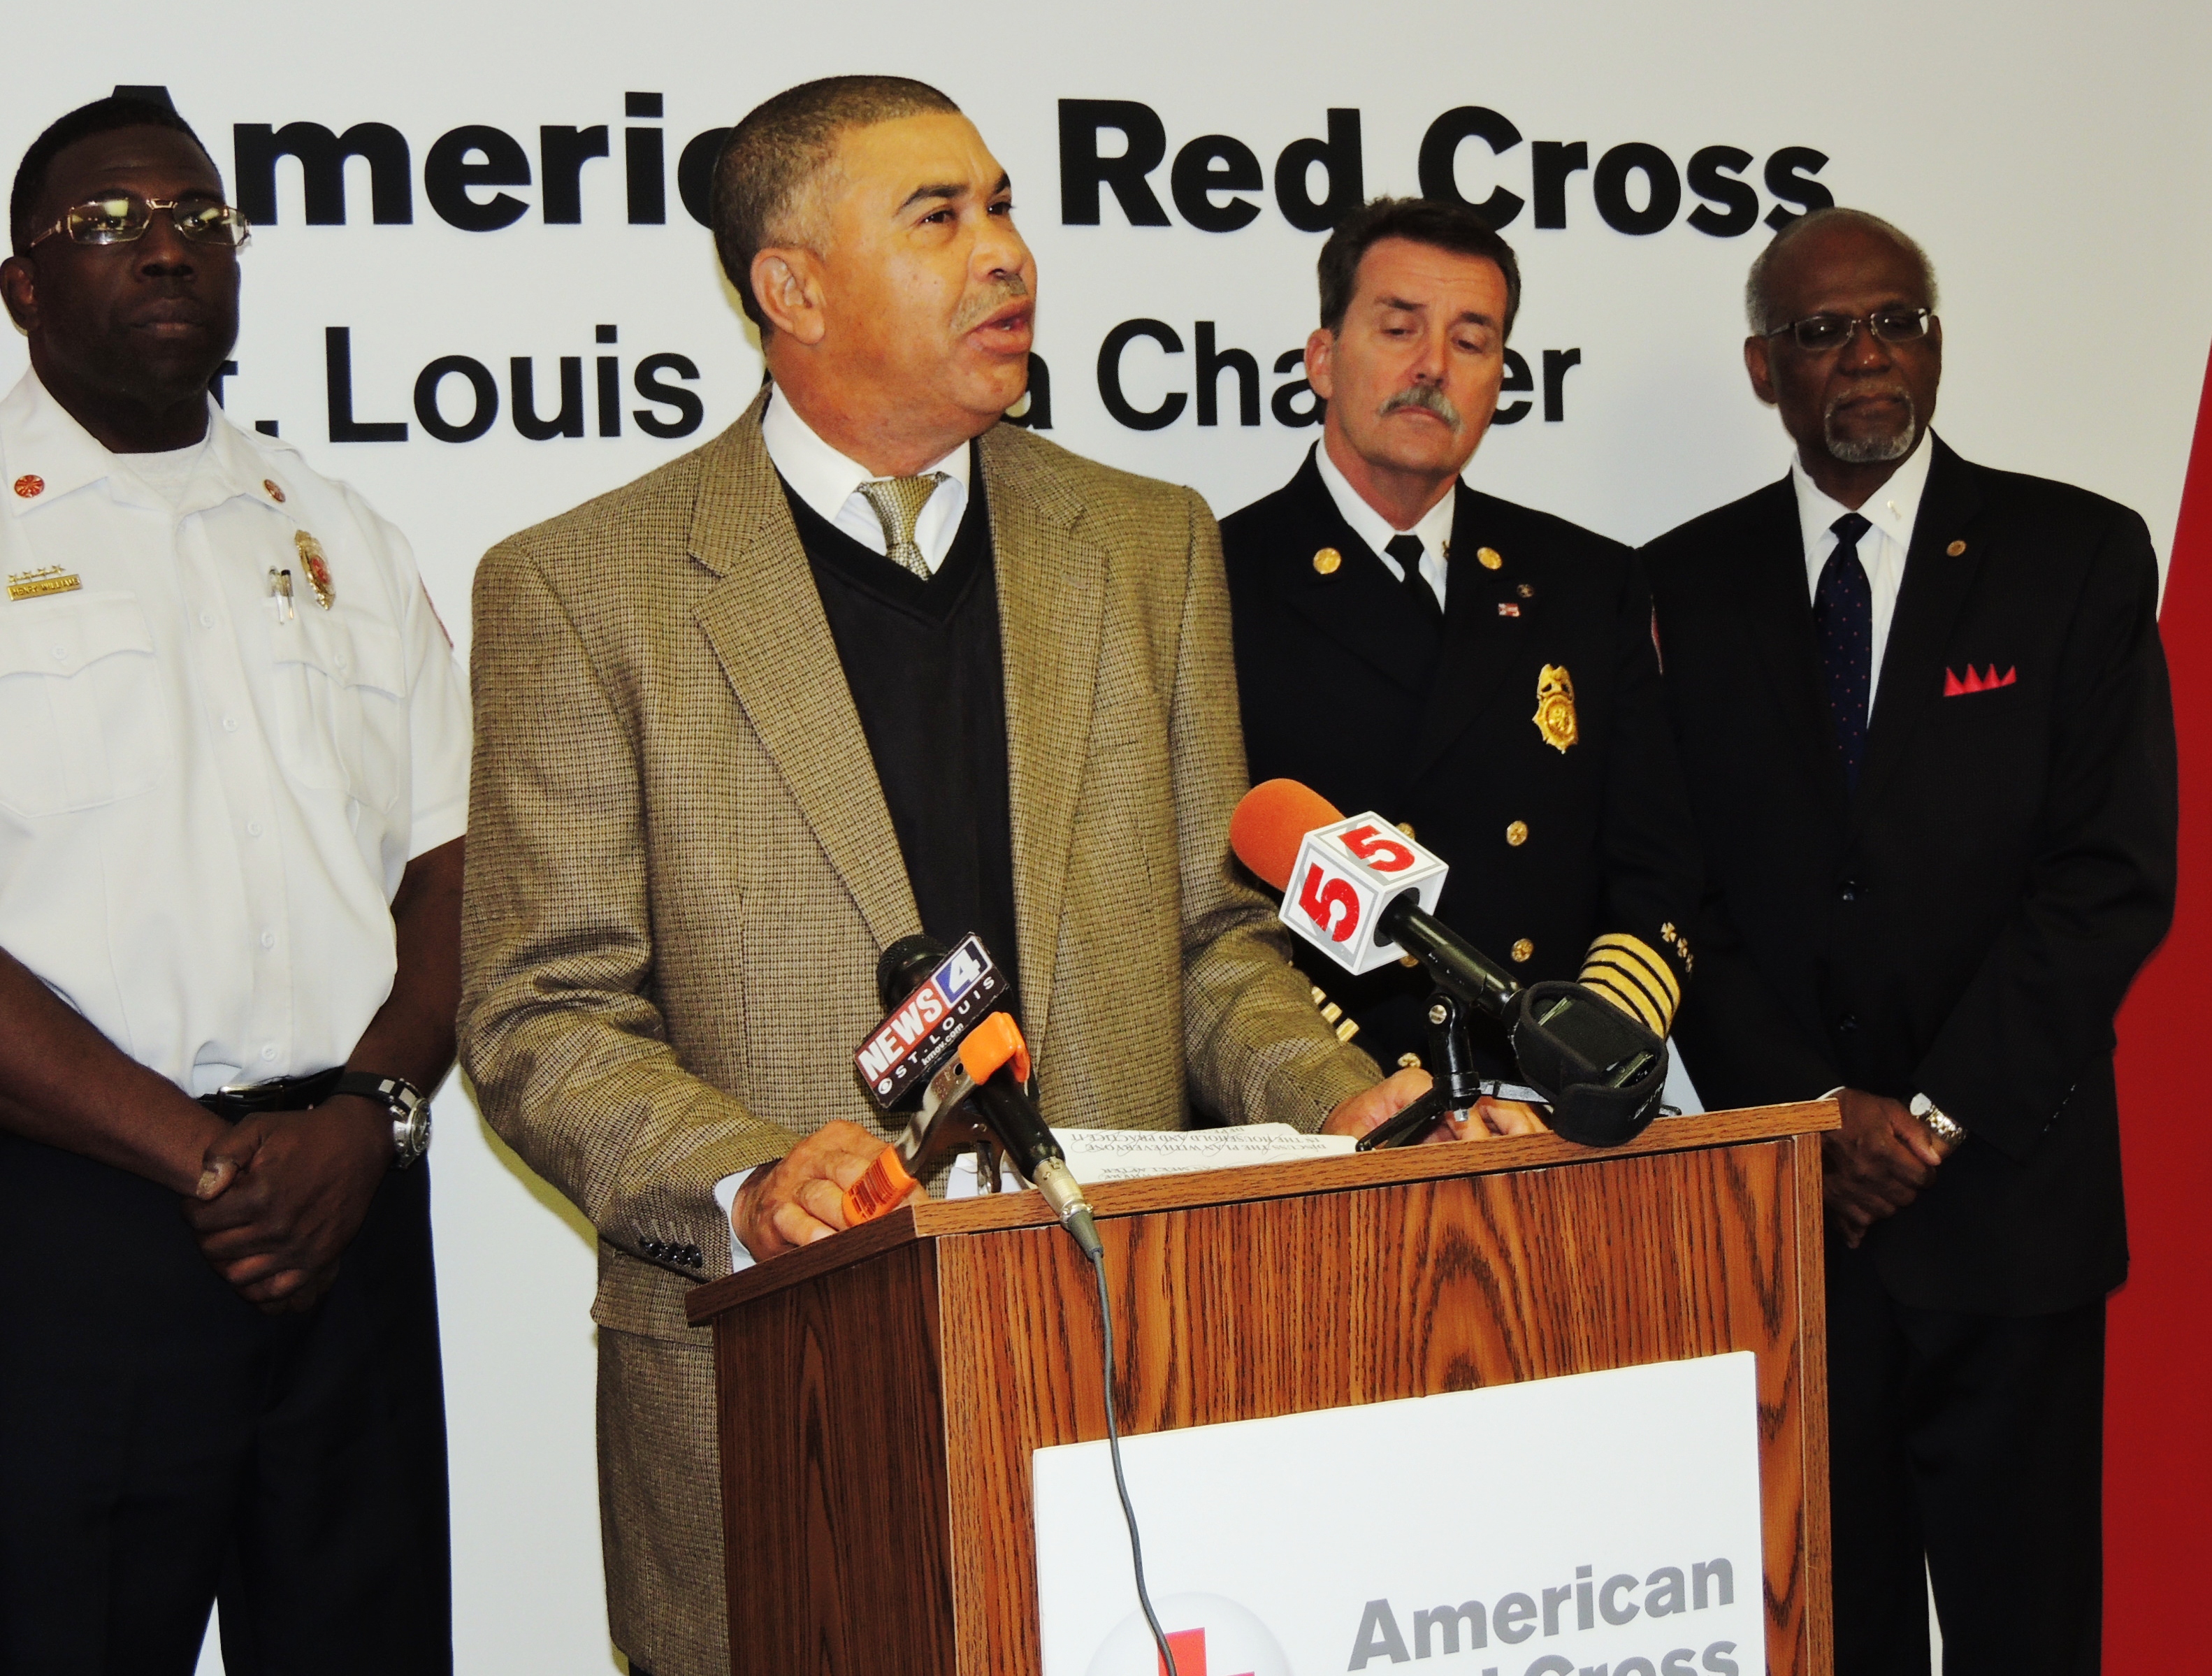 Kicking off National Fire Prevention Week with the American Red Cross